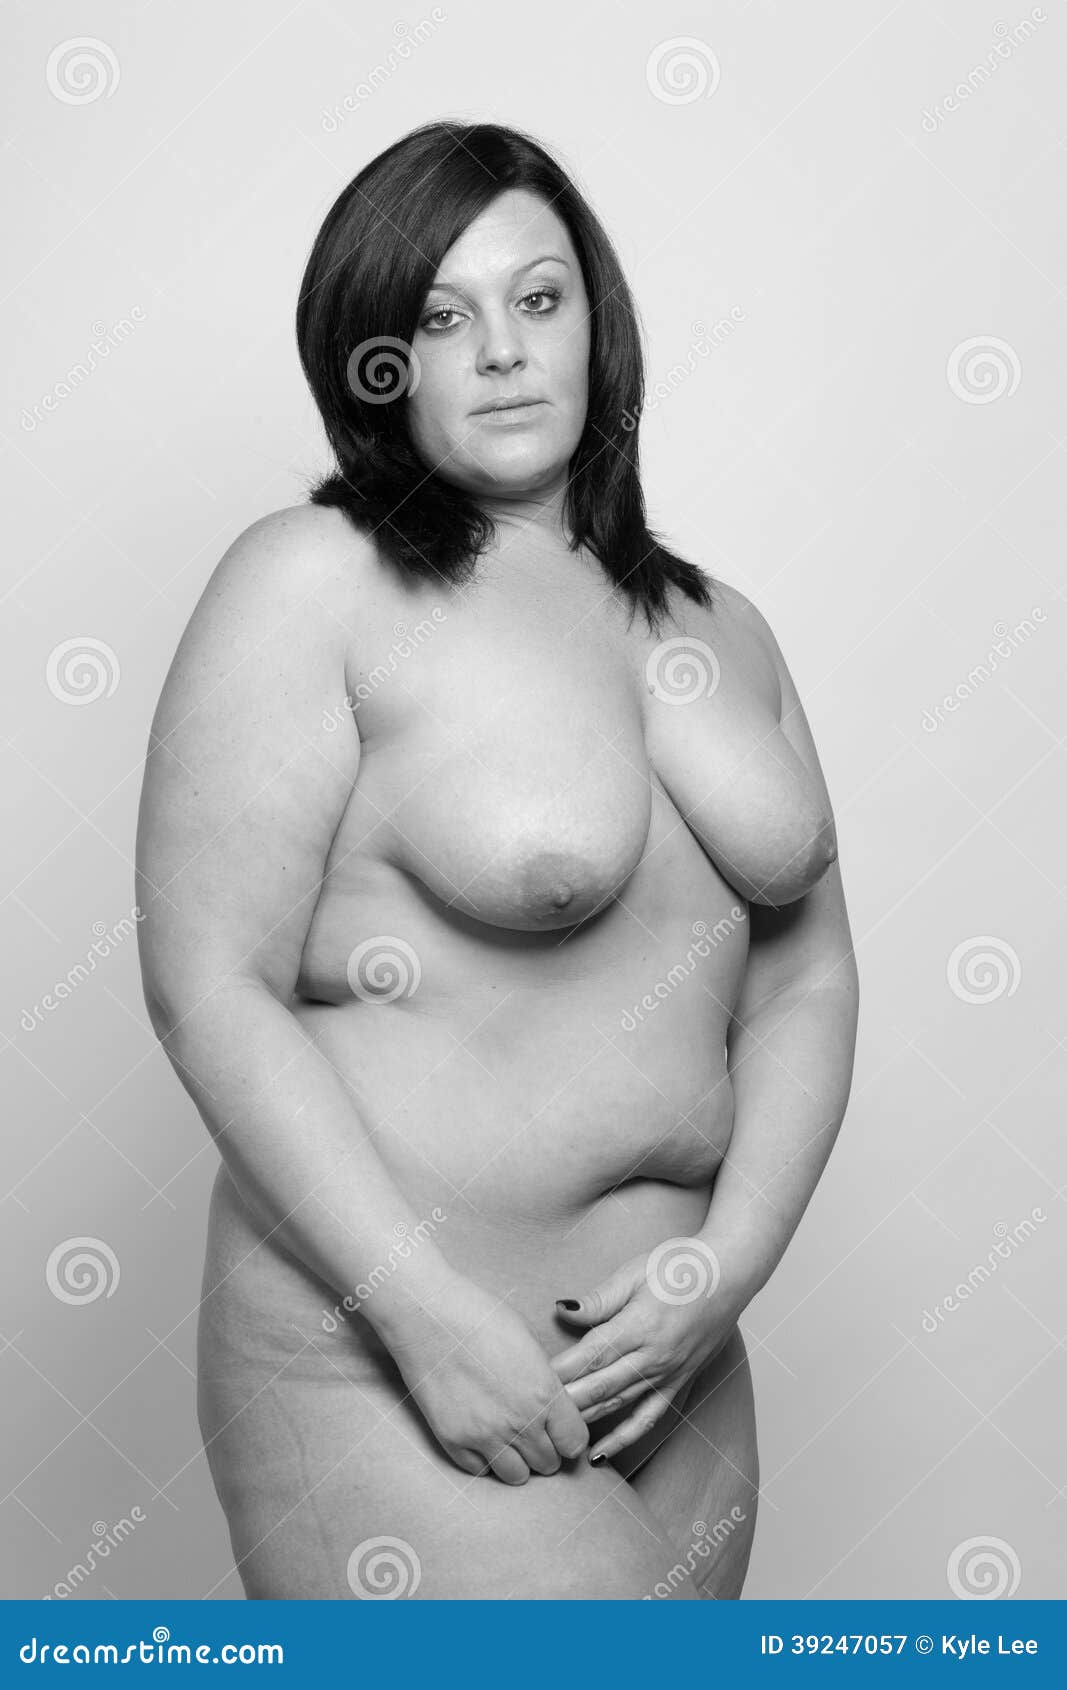 Nude Mature Plus Sized Woman Stock Image - Image of adult, naked